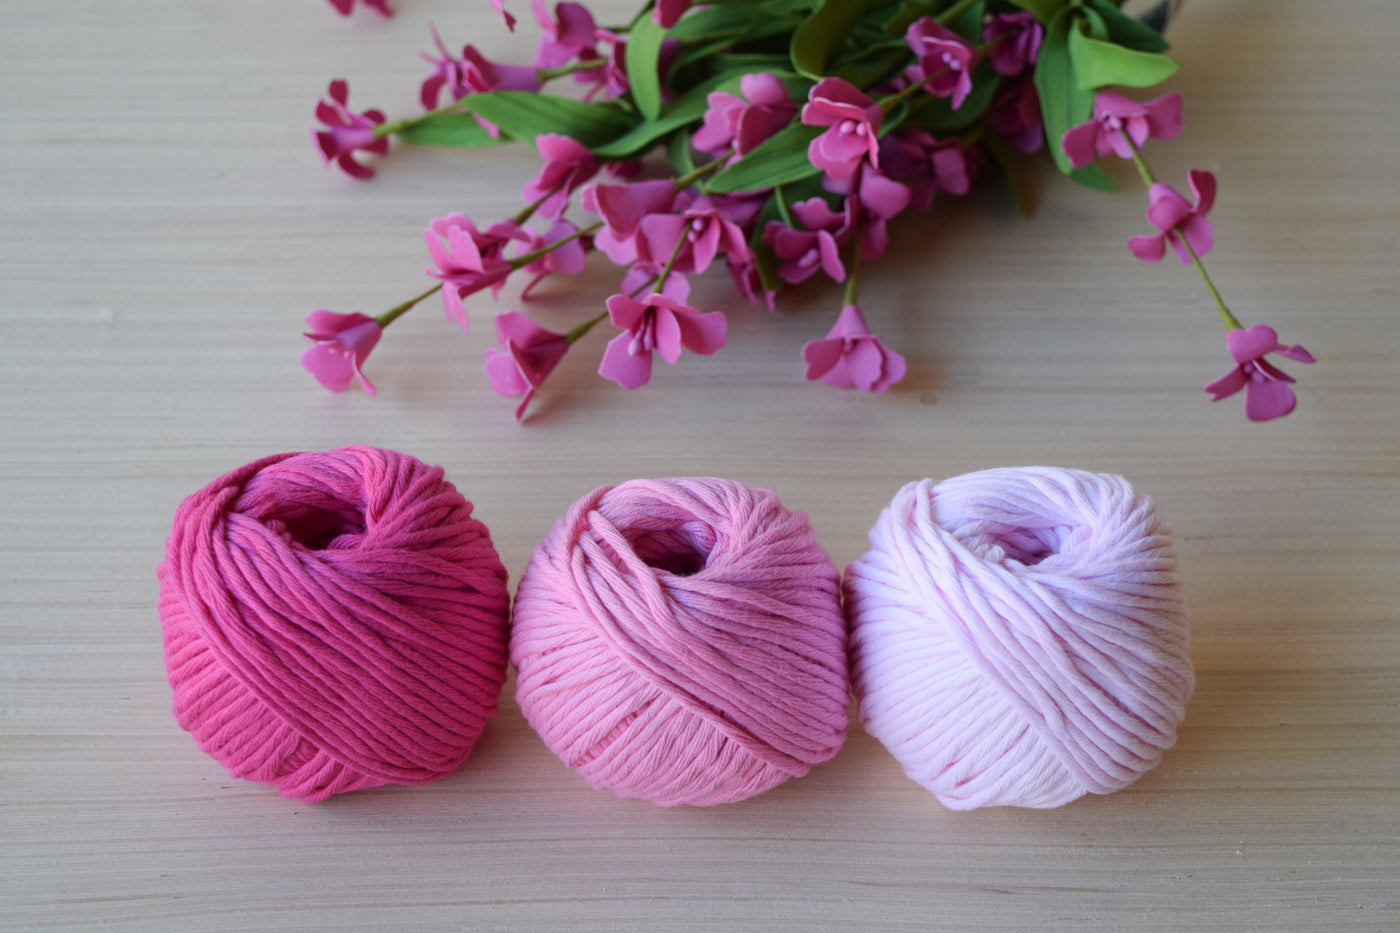 ORGANIC COTTON BALL 2MM - FRENCH PINK COLOR